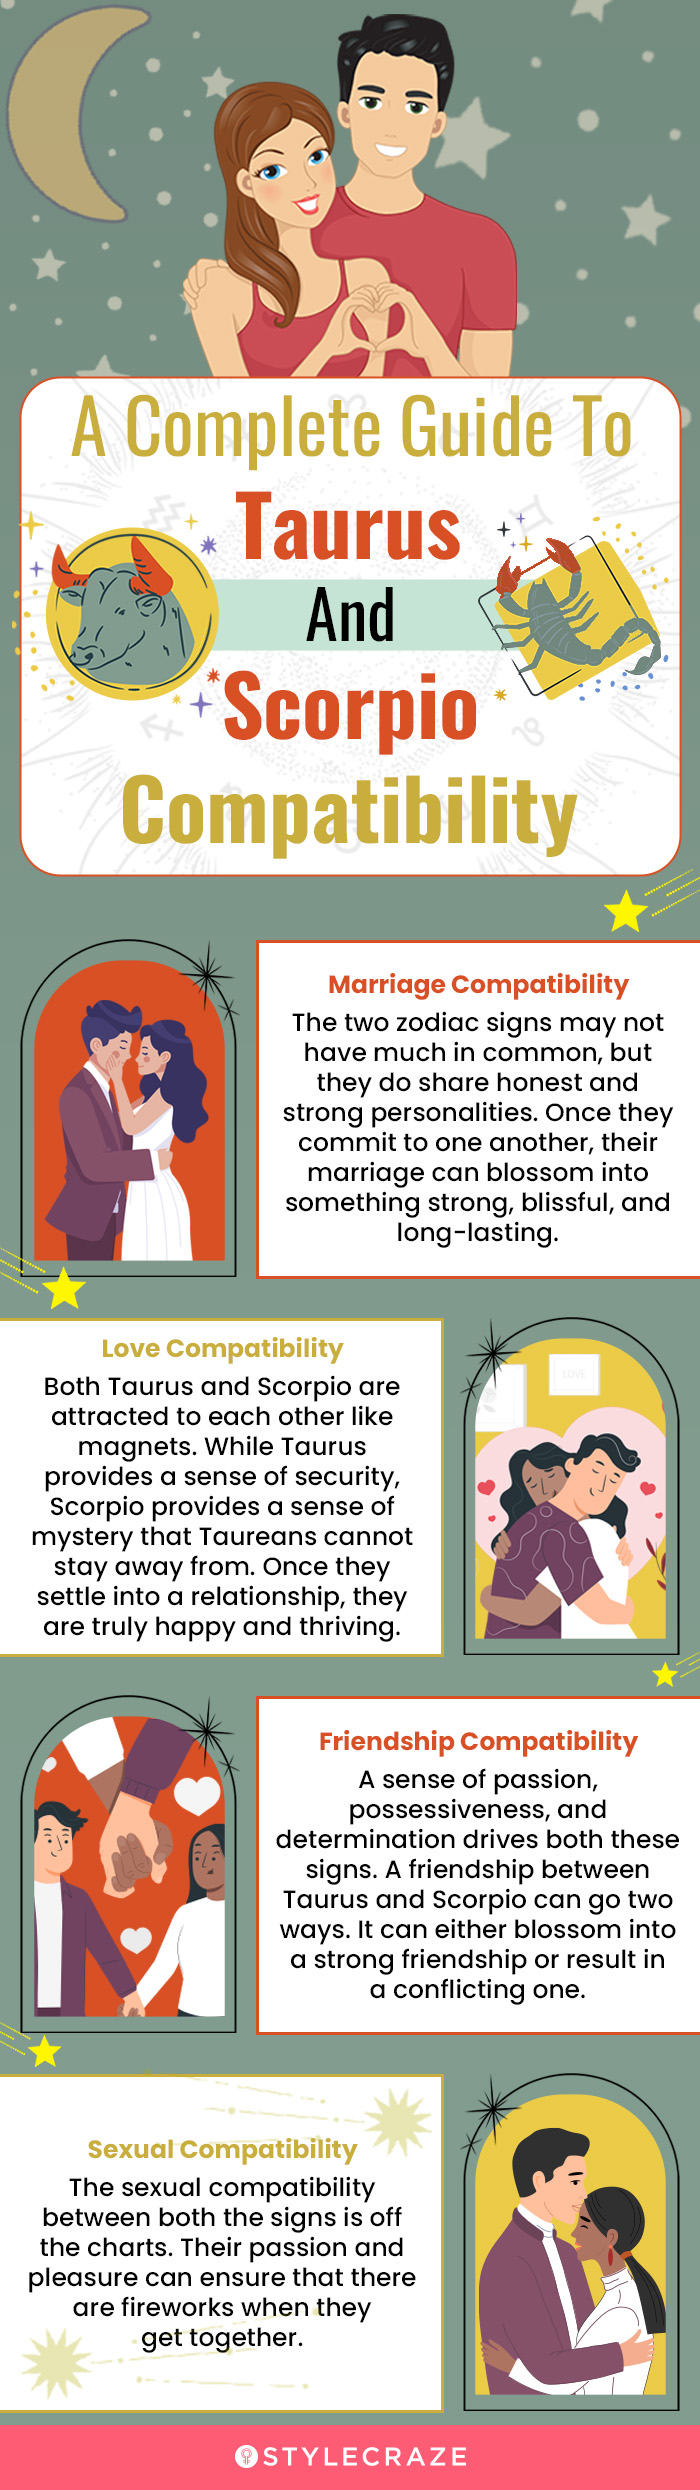 a complete guide to taurus and scorpio compatibility (infographic)